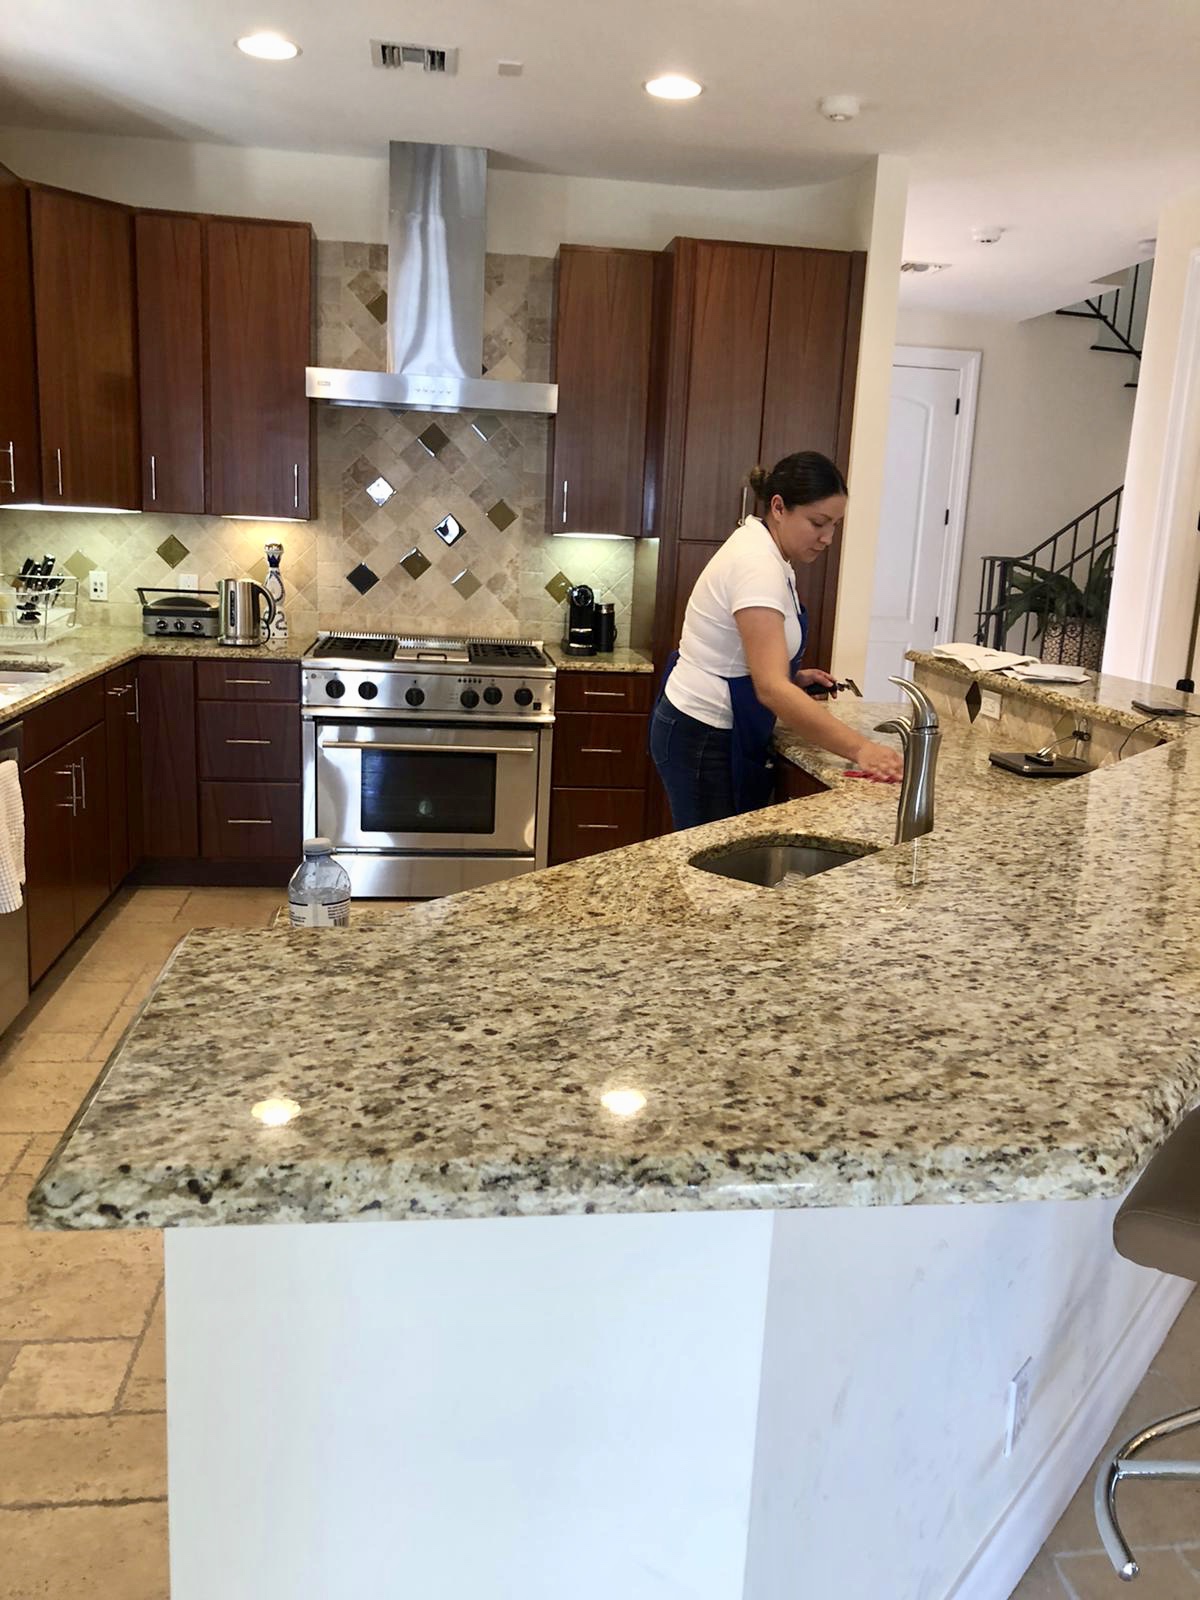 Cleaning Services, Boynton Beach, FL | Cleaning Services | Maid Services